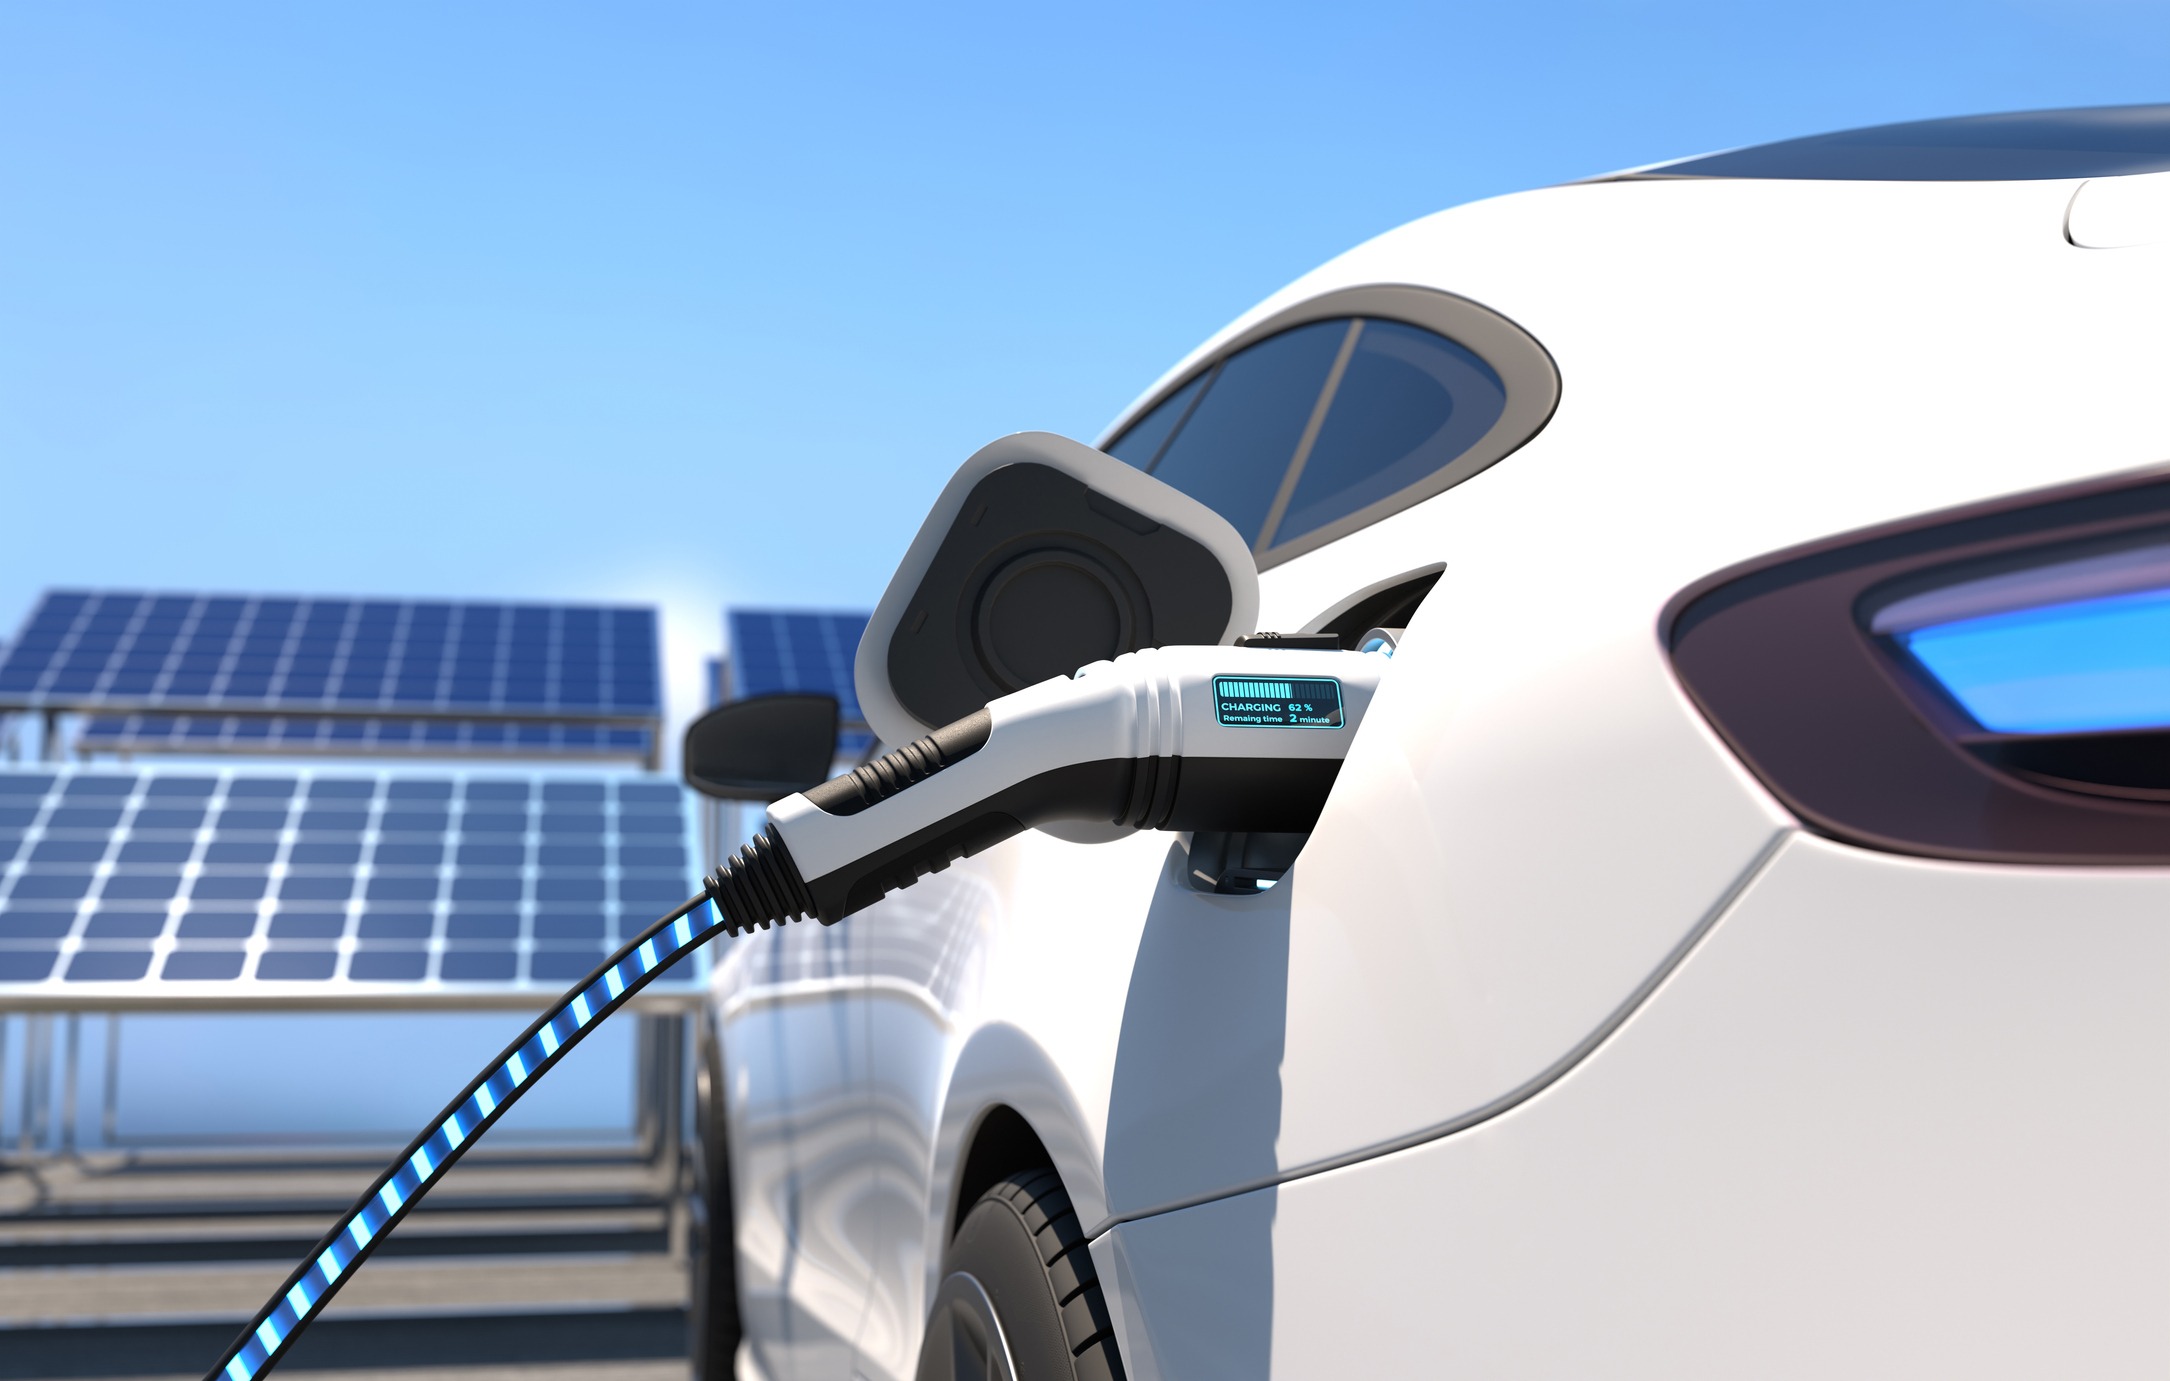 An electric vehicle is charging from a power station with solar panels in the background under a clear blue sky, showcasing clean energy use.